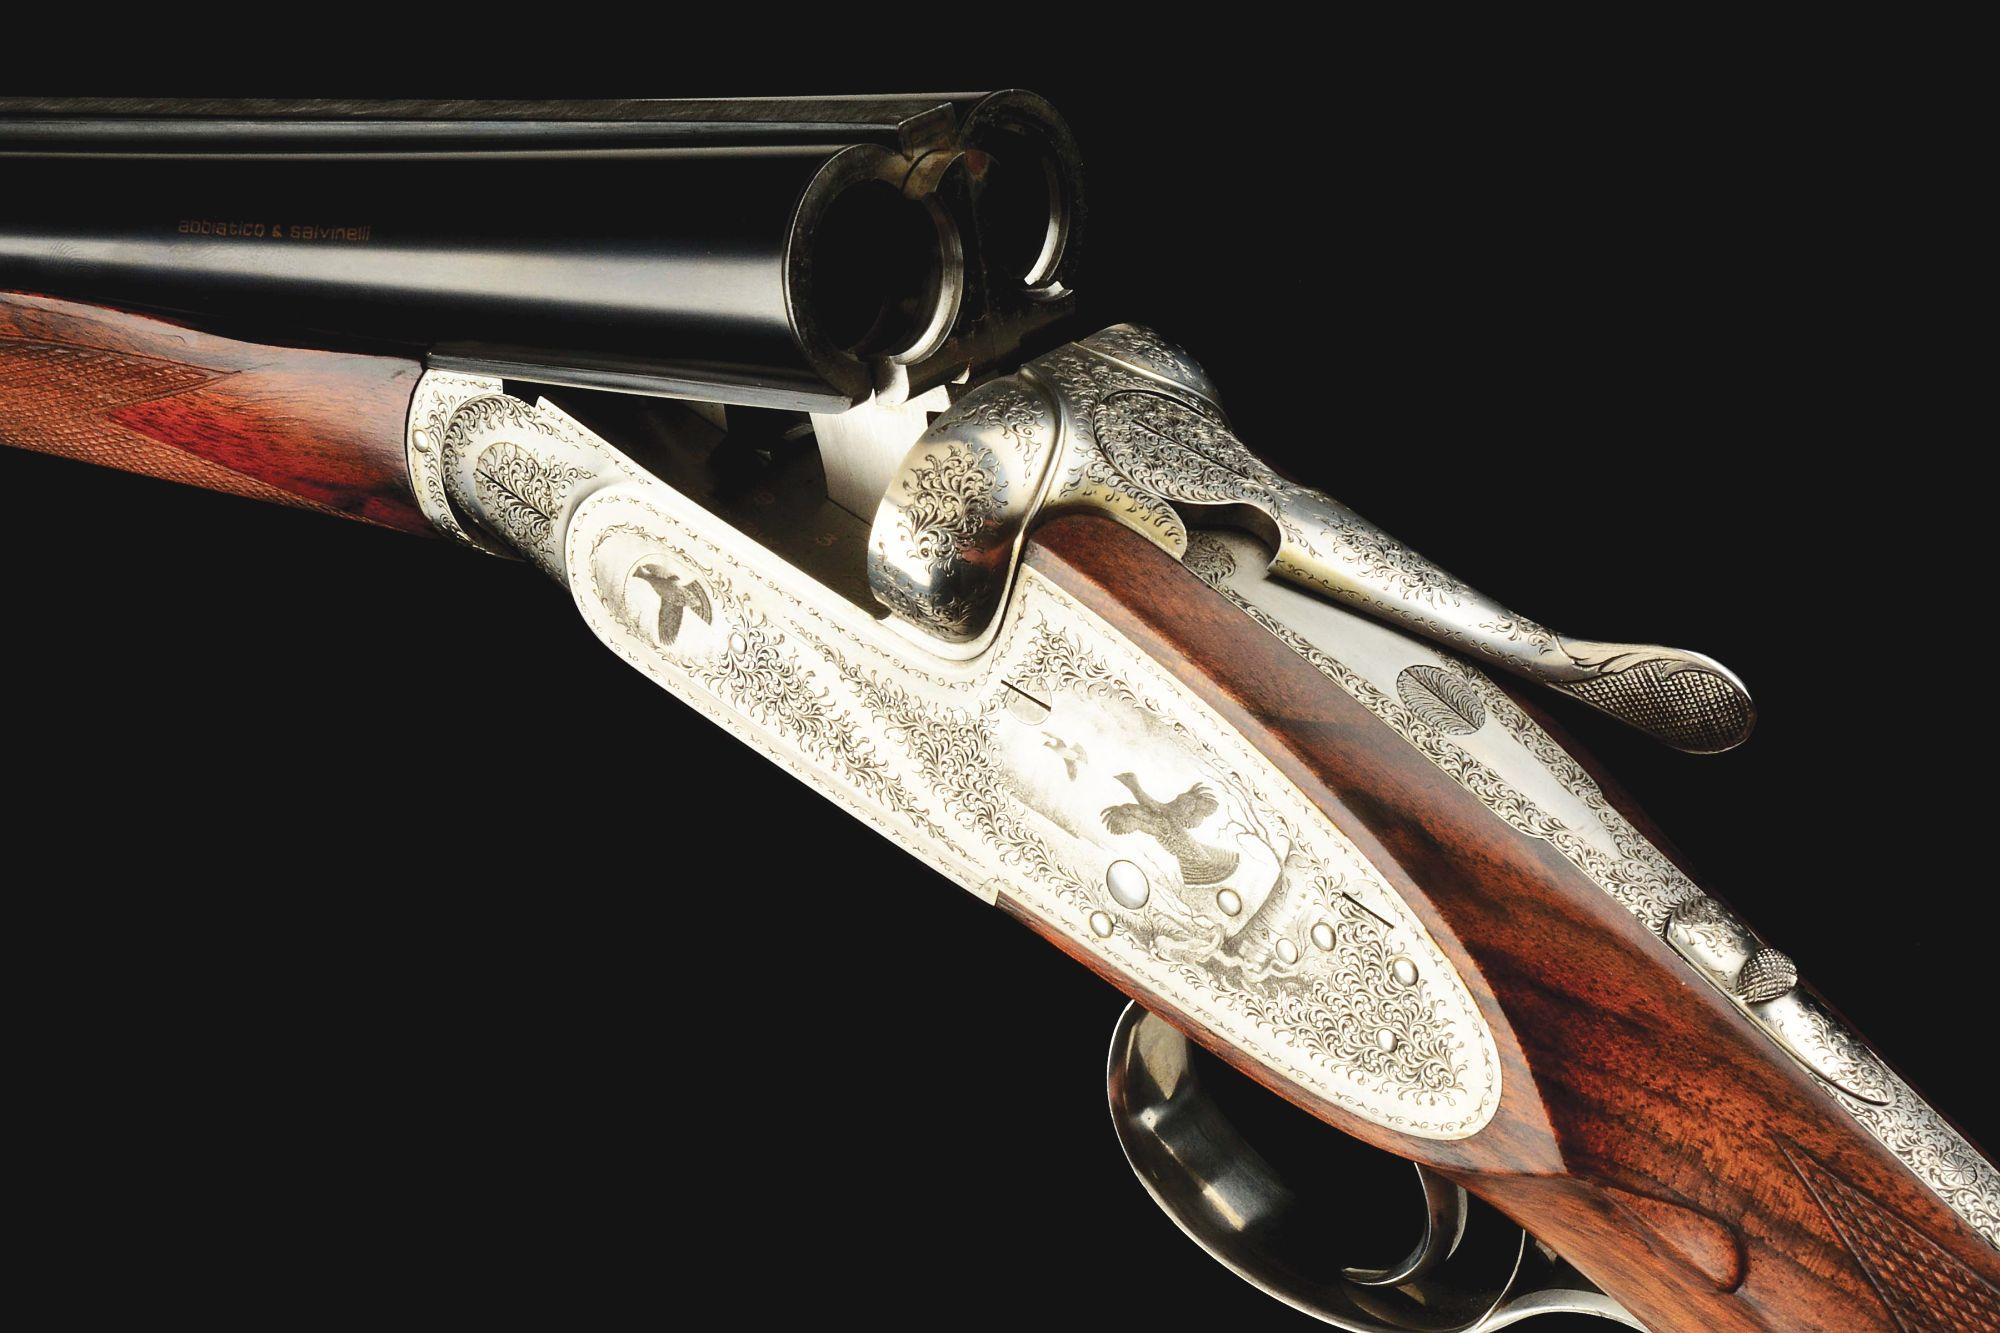 (M) BEAUTIFUL 28 GAUGE ABBIATICO & SALVINELLI SIDELOCK EJECTOR SINGLE TRIGGER GAME SHOTGUN WITH EXCE